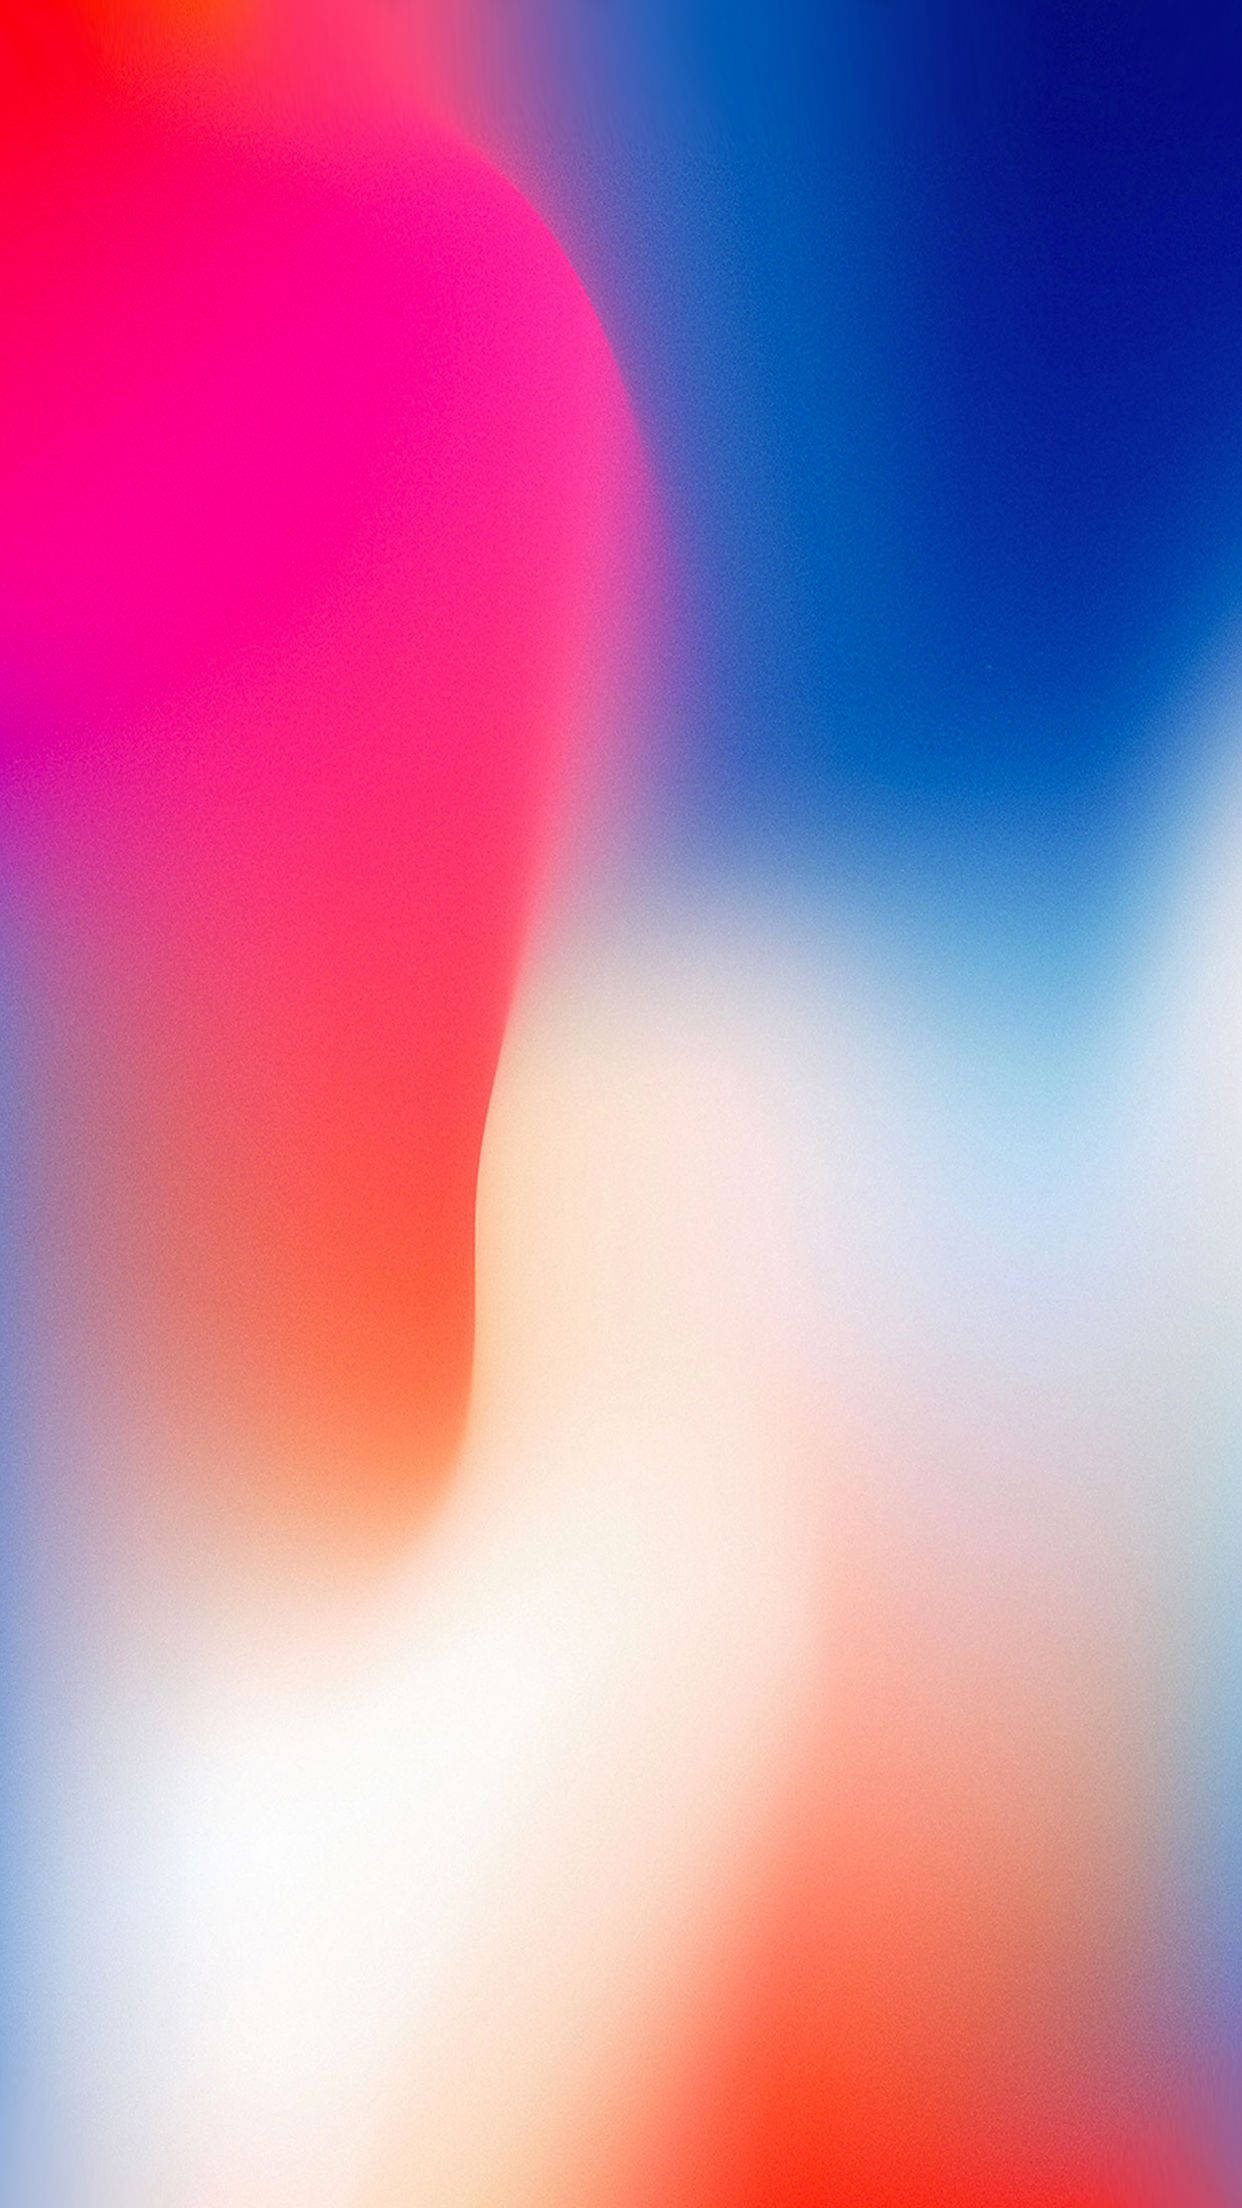 IPhone Wallpaper & Background For FREE